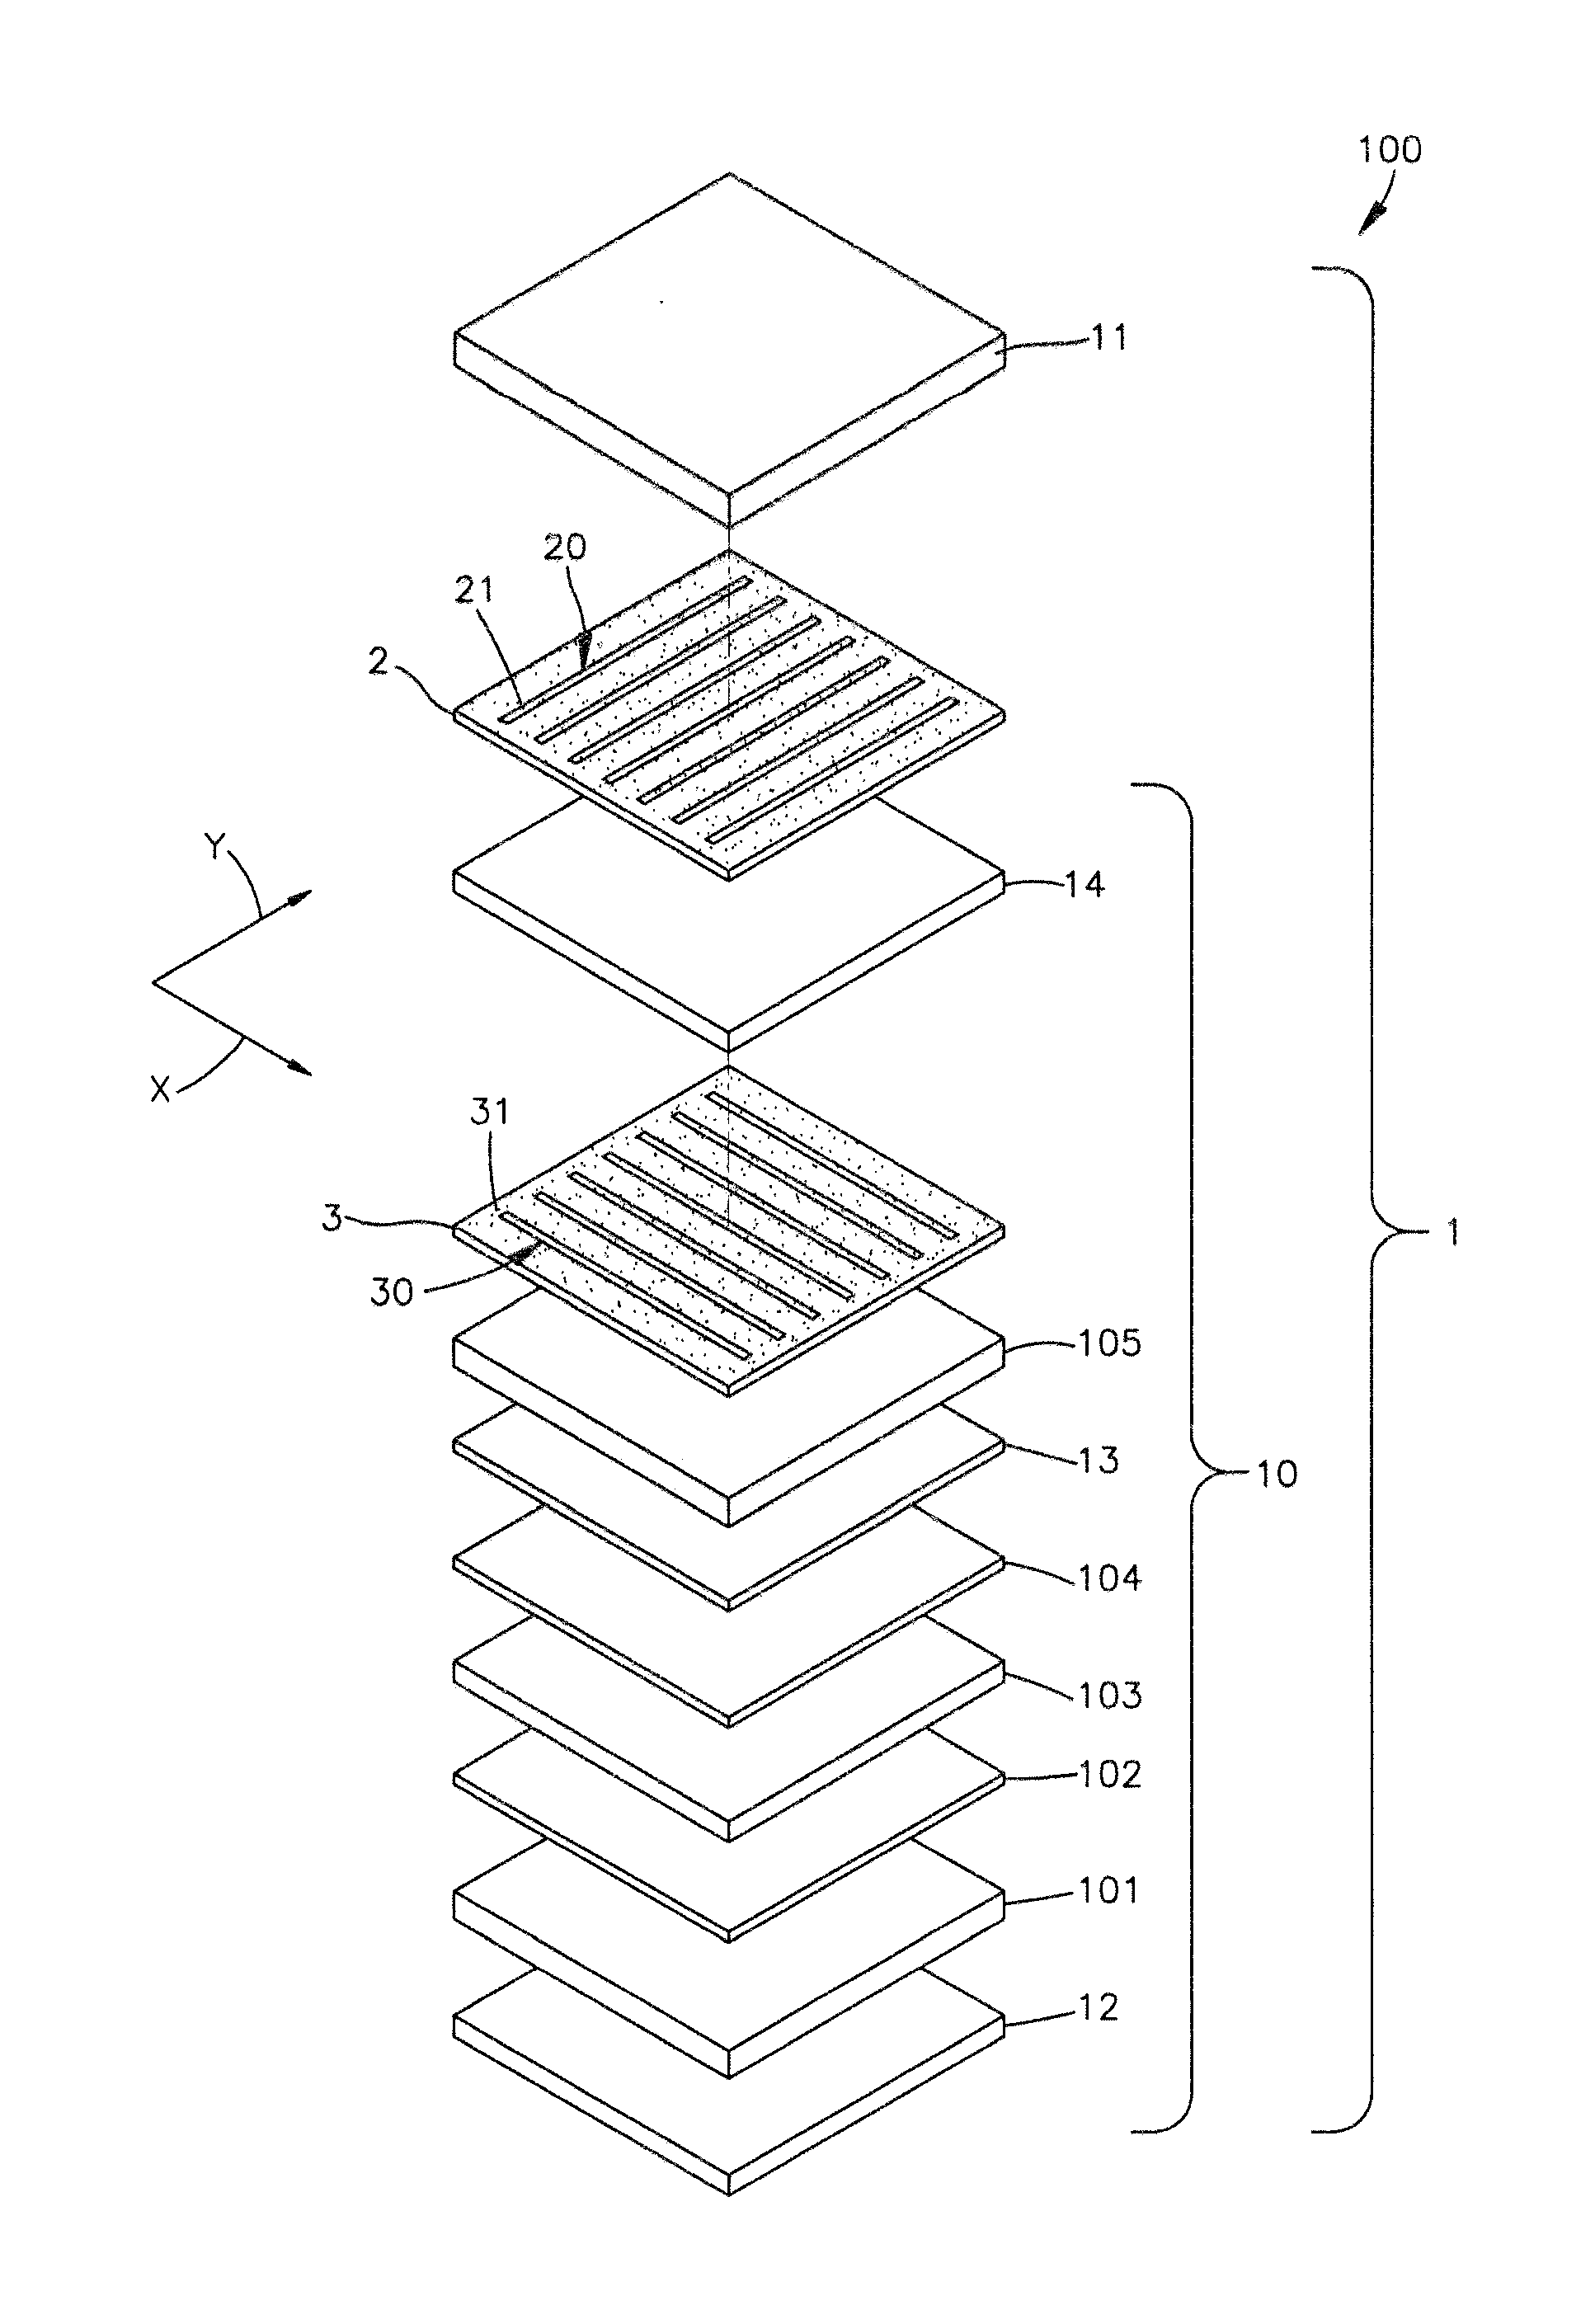 Liquid crystal display integrated with capacitive touch devices